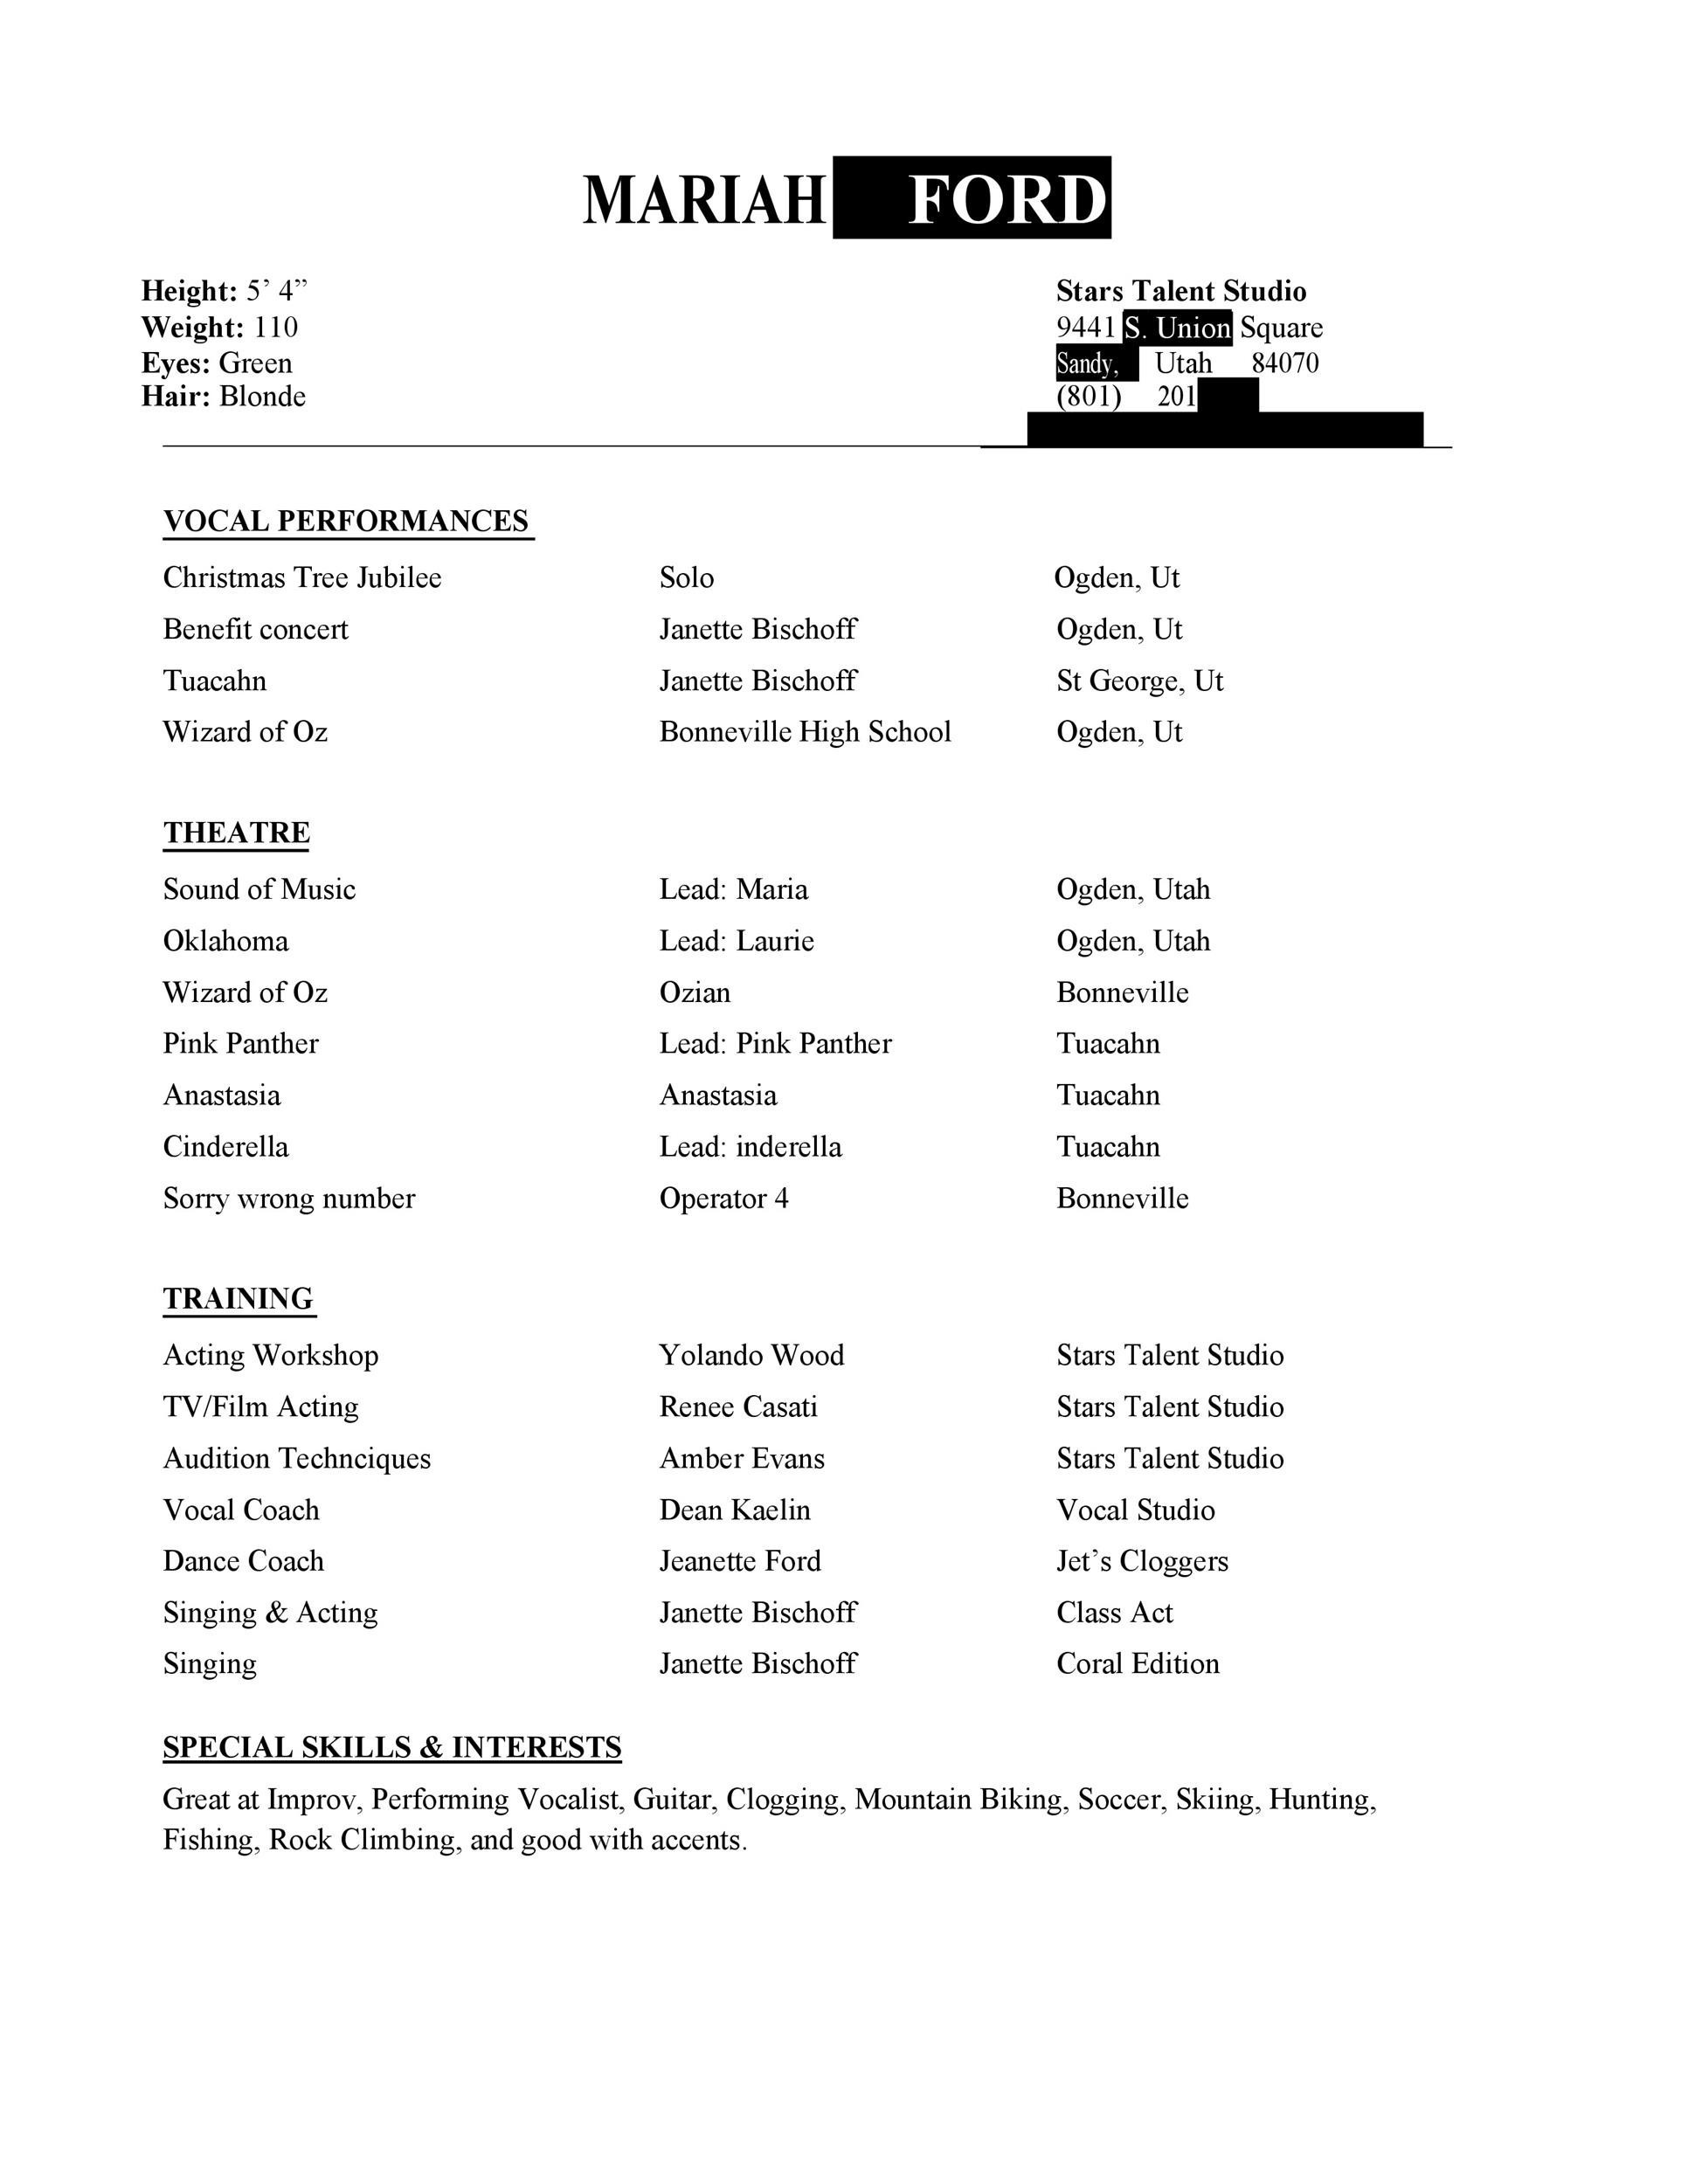 Free Acting Resume Template with Photo 50 Free Acting Resume Templates (word & Google Docs) á Templatelab